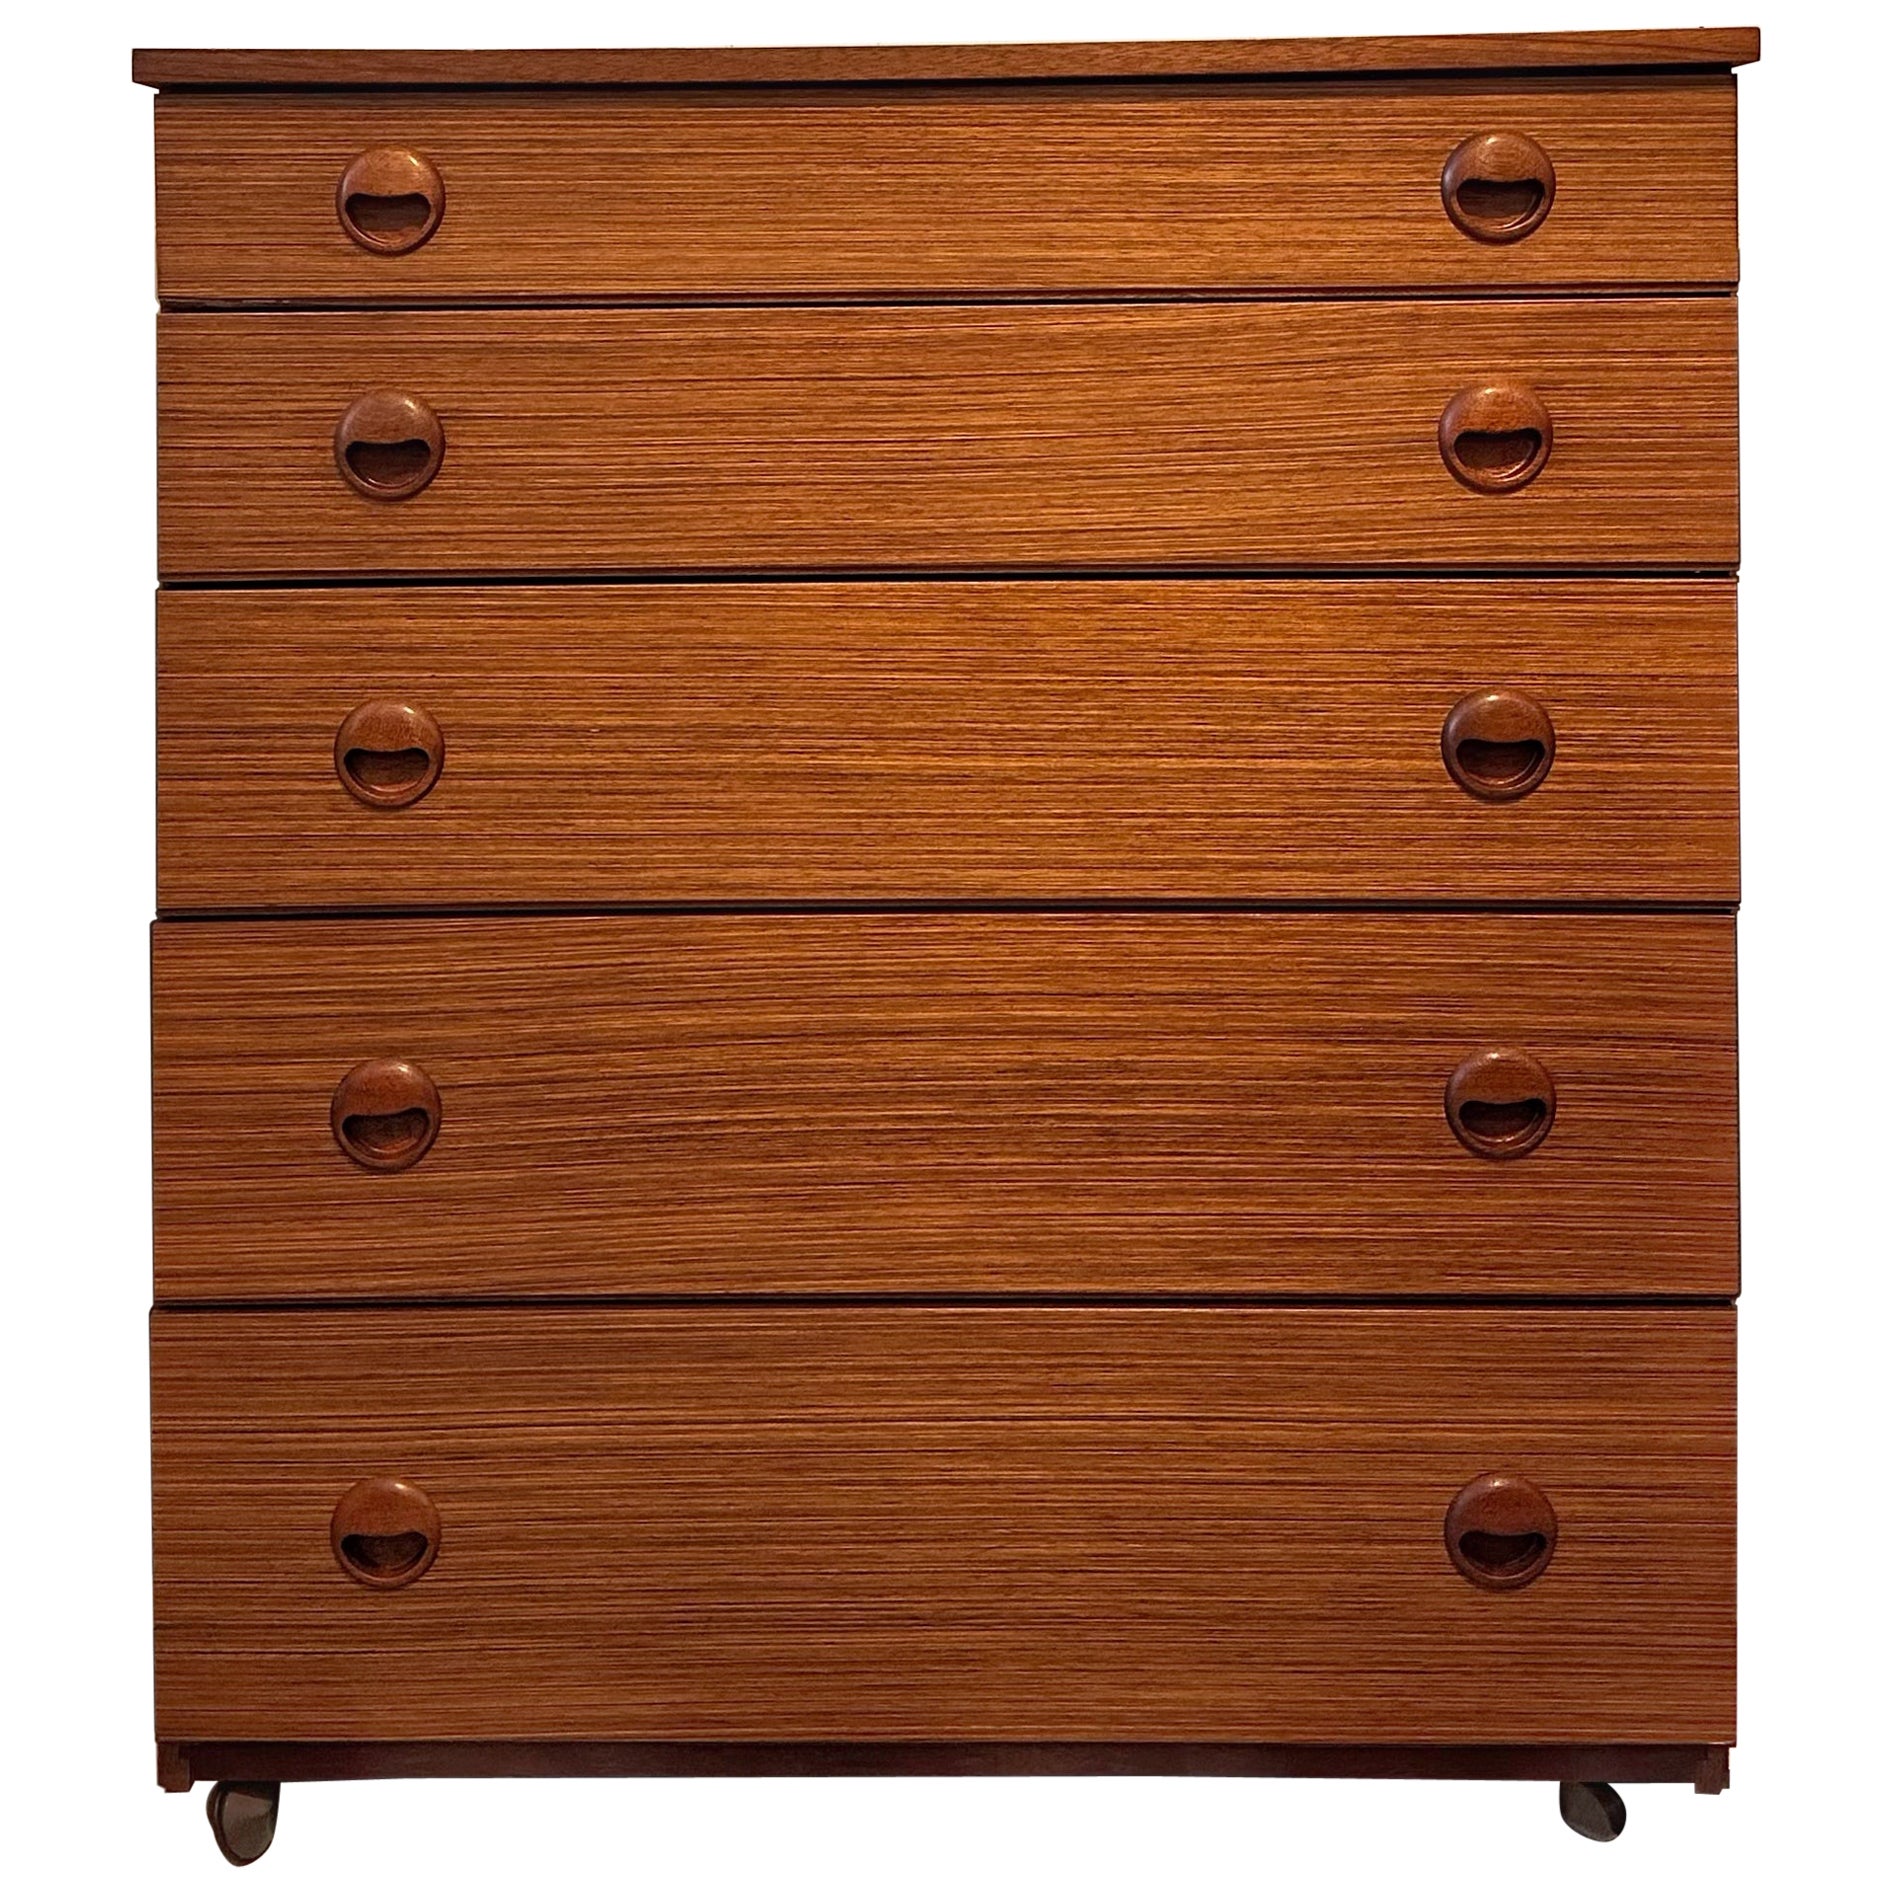 Beautiful Mid Century Retro Teak Chest of Drawers by Schreiber For Sale